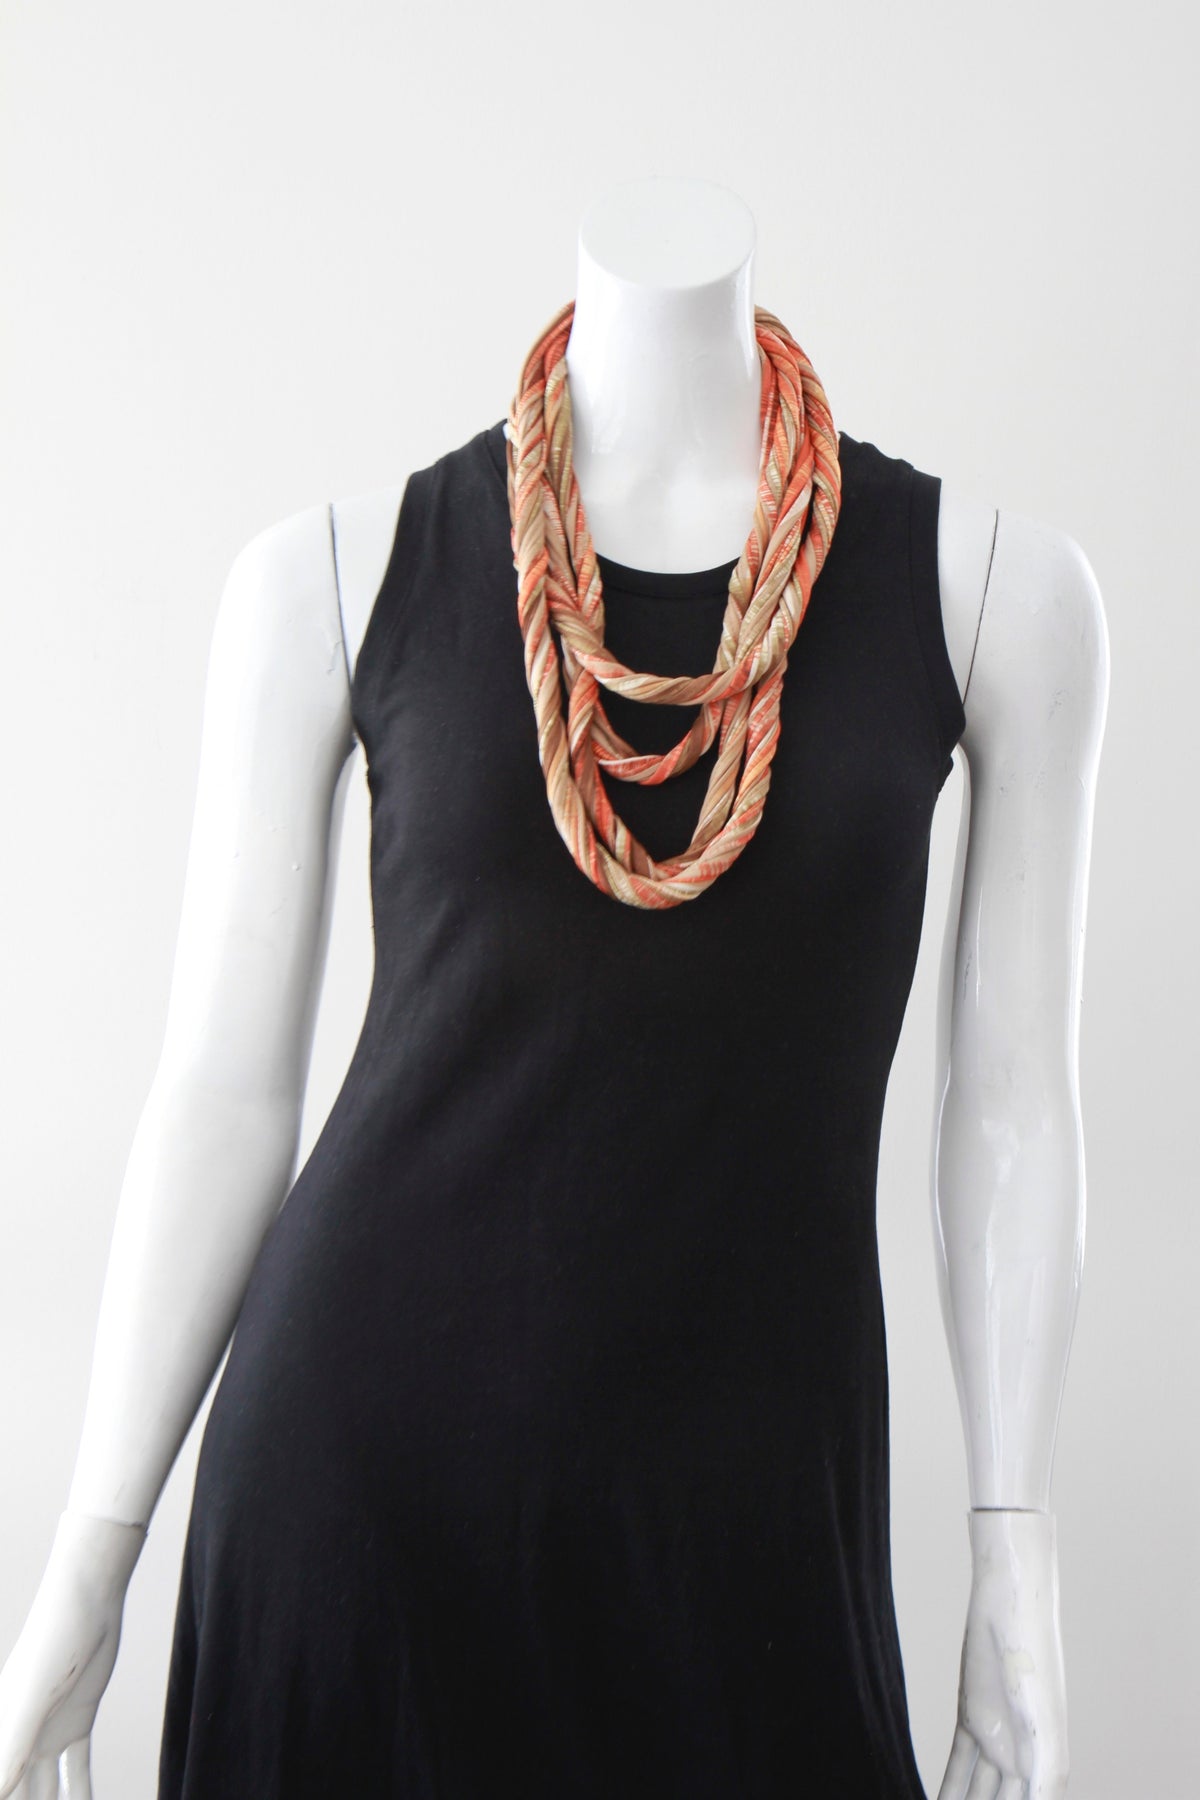 Orange and Tan Infinity Scarf Necklace &#39;Blurred Lines&#39;